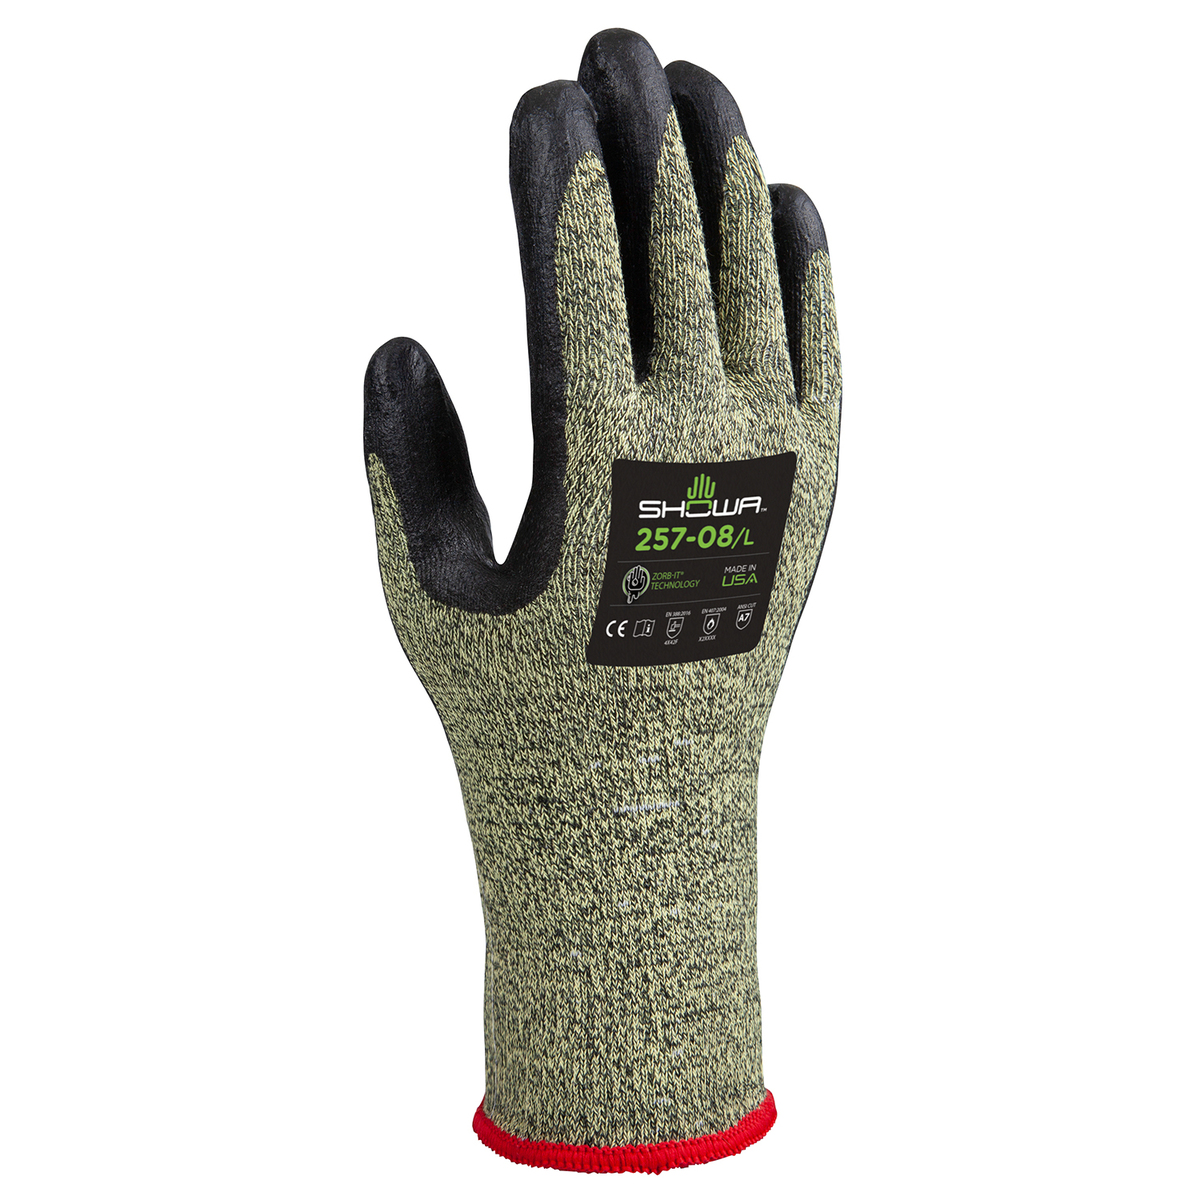 SHOWA® Size 9 10 Gauge Spandex, Aramid And Stainless Steel Cut Resistant Gloves With Foam Nitrile Coated Palm